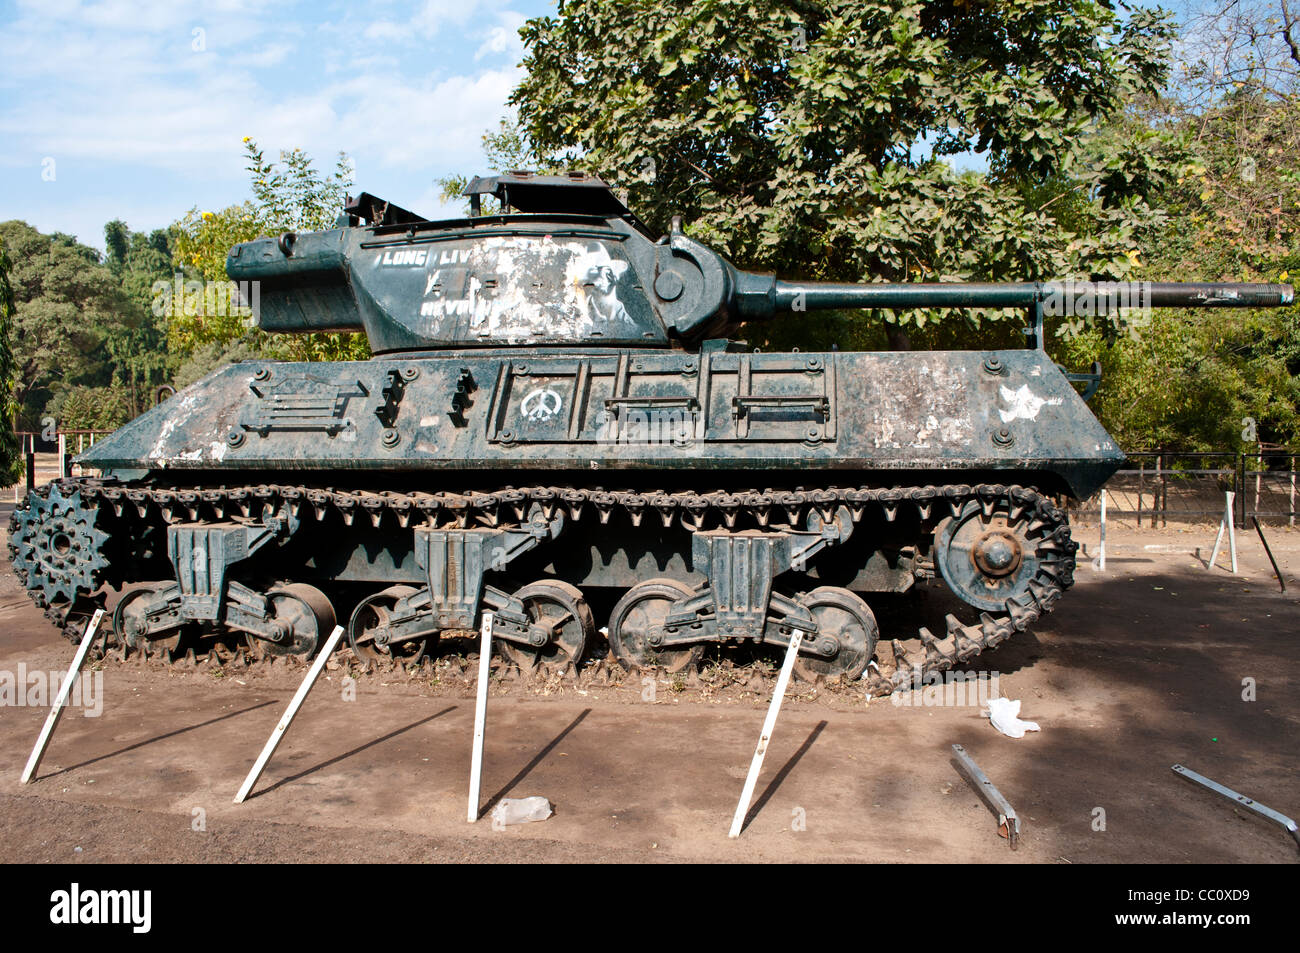 Captured Pakistani army tank in front of Museum and Art Gallery,  Chandigarh, India Stock Photo - Alamy